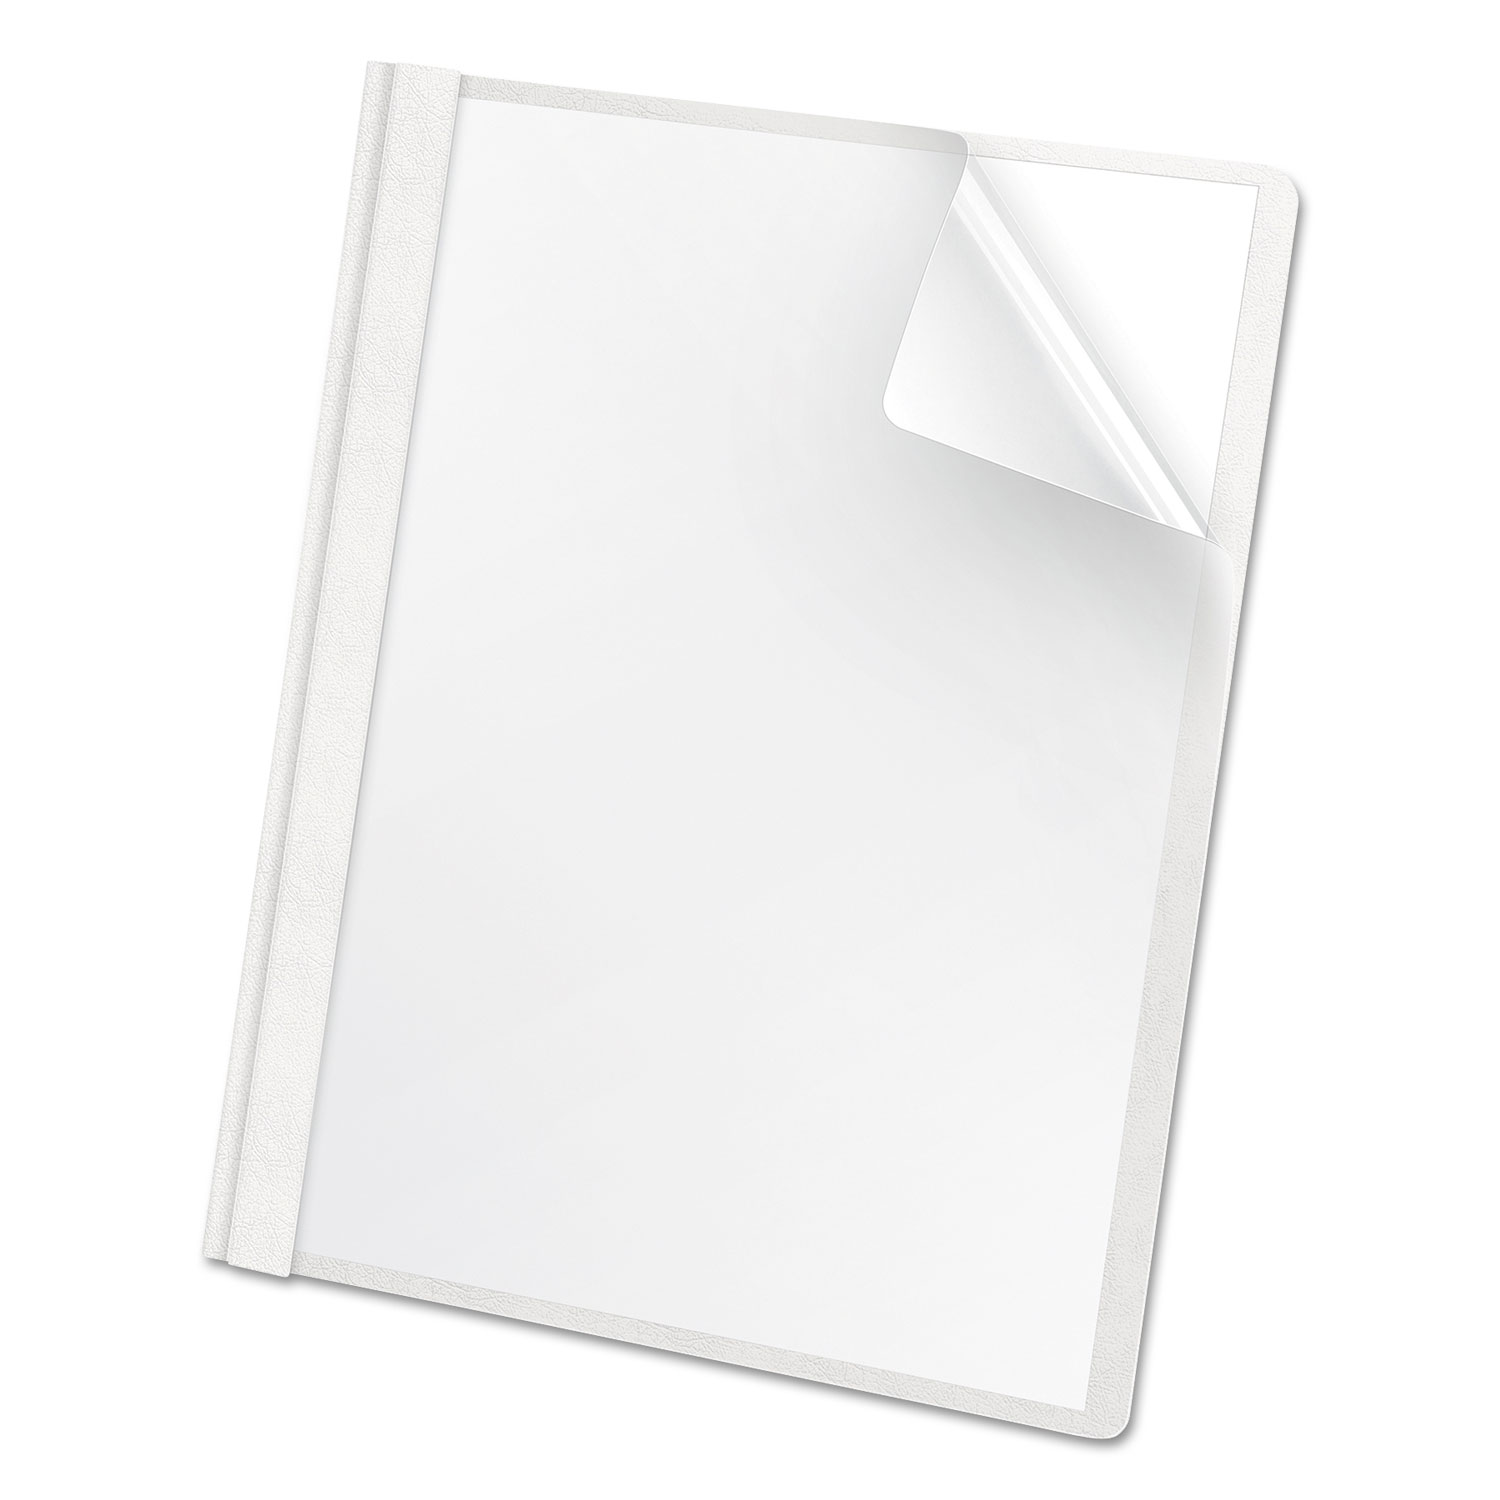  Oxford 58804EE Premium Paper Clear Front Cover, 3 Fasteners, Letter, White, 25/Box (OXF58804) 